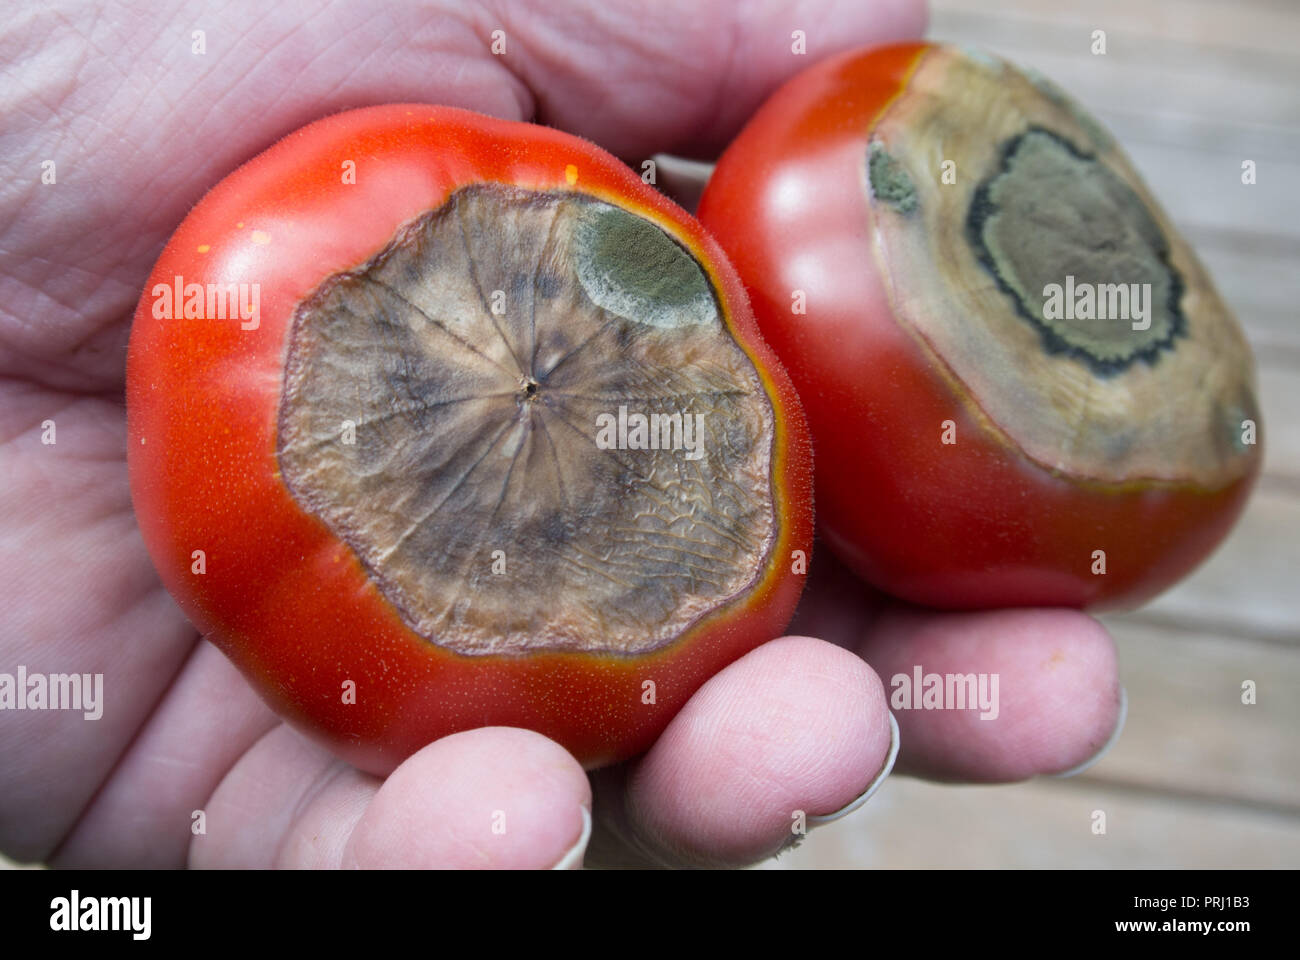 Blossom end rot on tomatoes Stock Photo